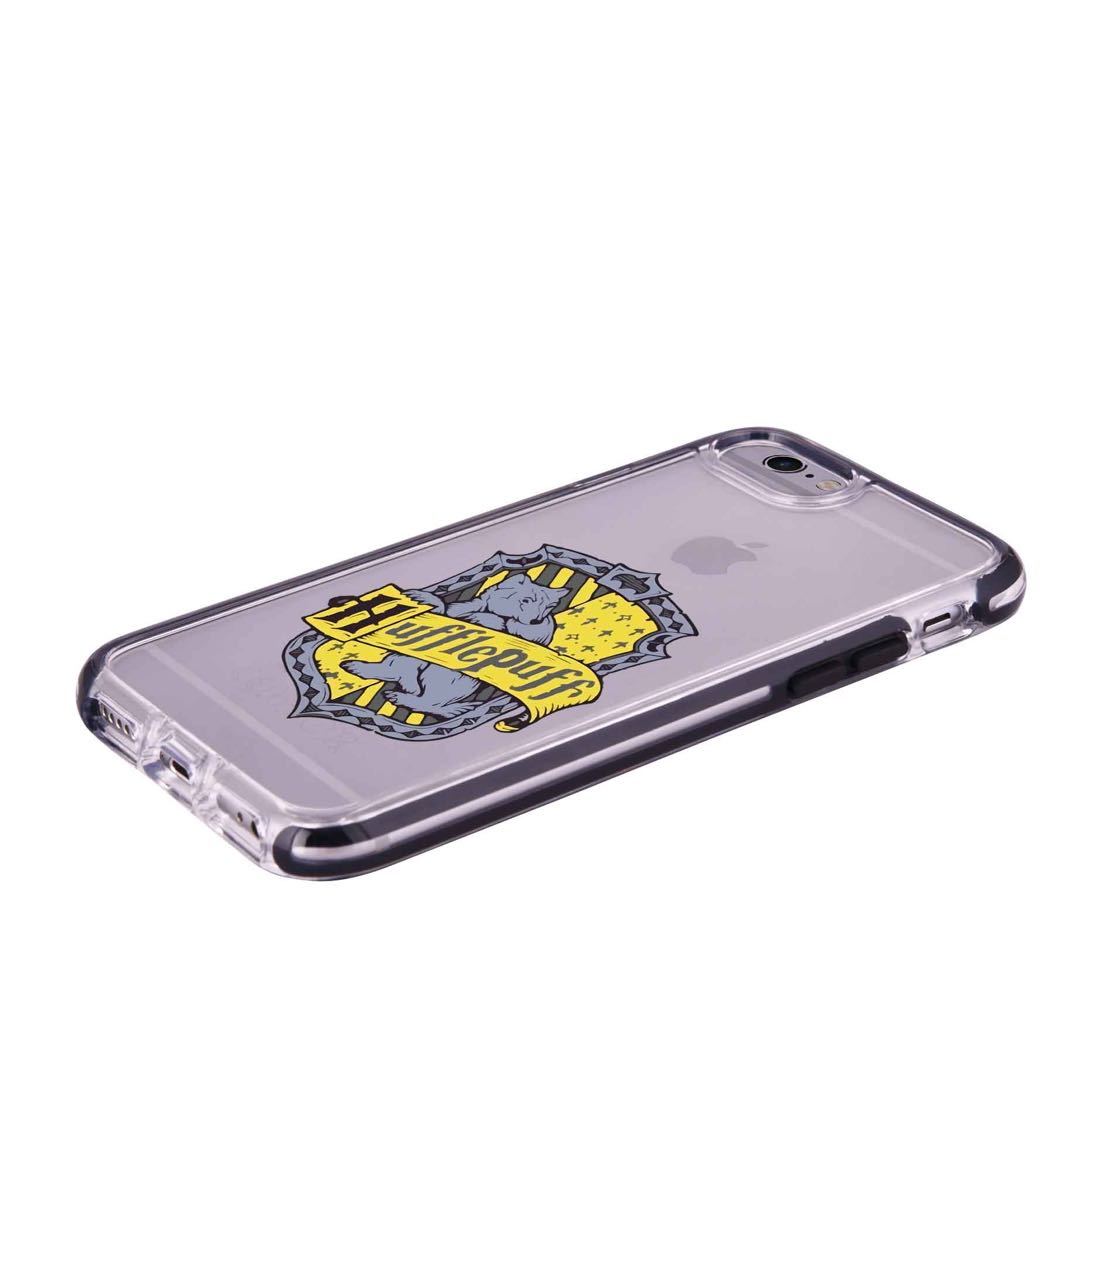 Crest Hufflepuff - Extreme Phone Case for iPhone 6 Plus